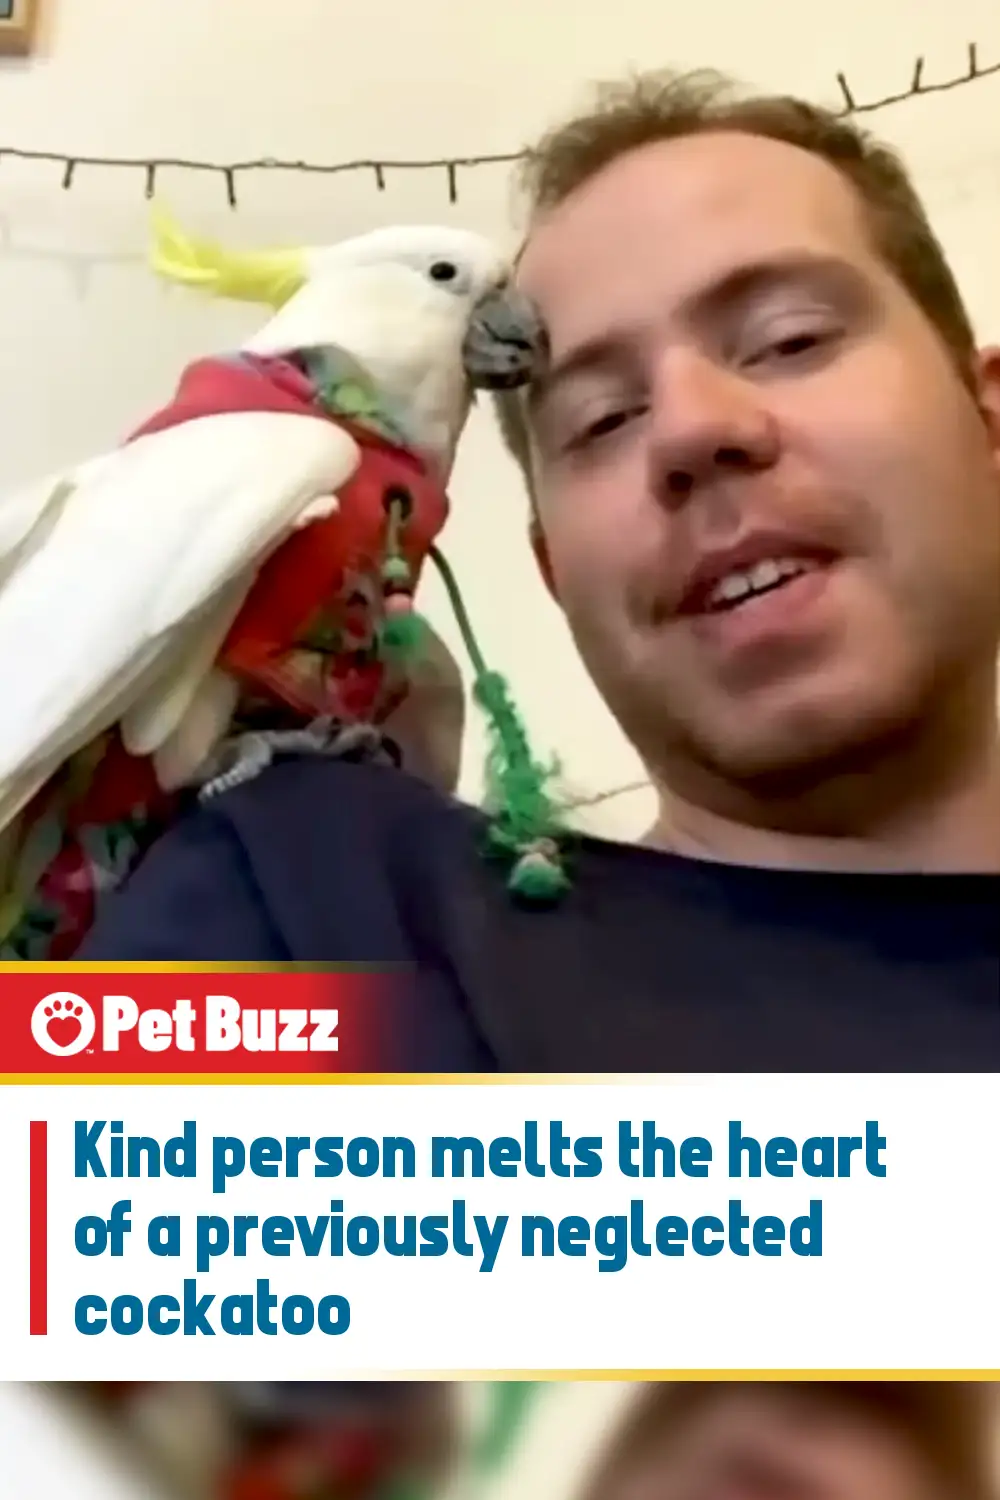 Kind person melts the heart of a previously neglected cockatoo